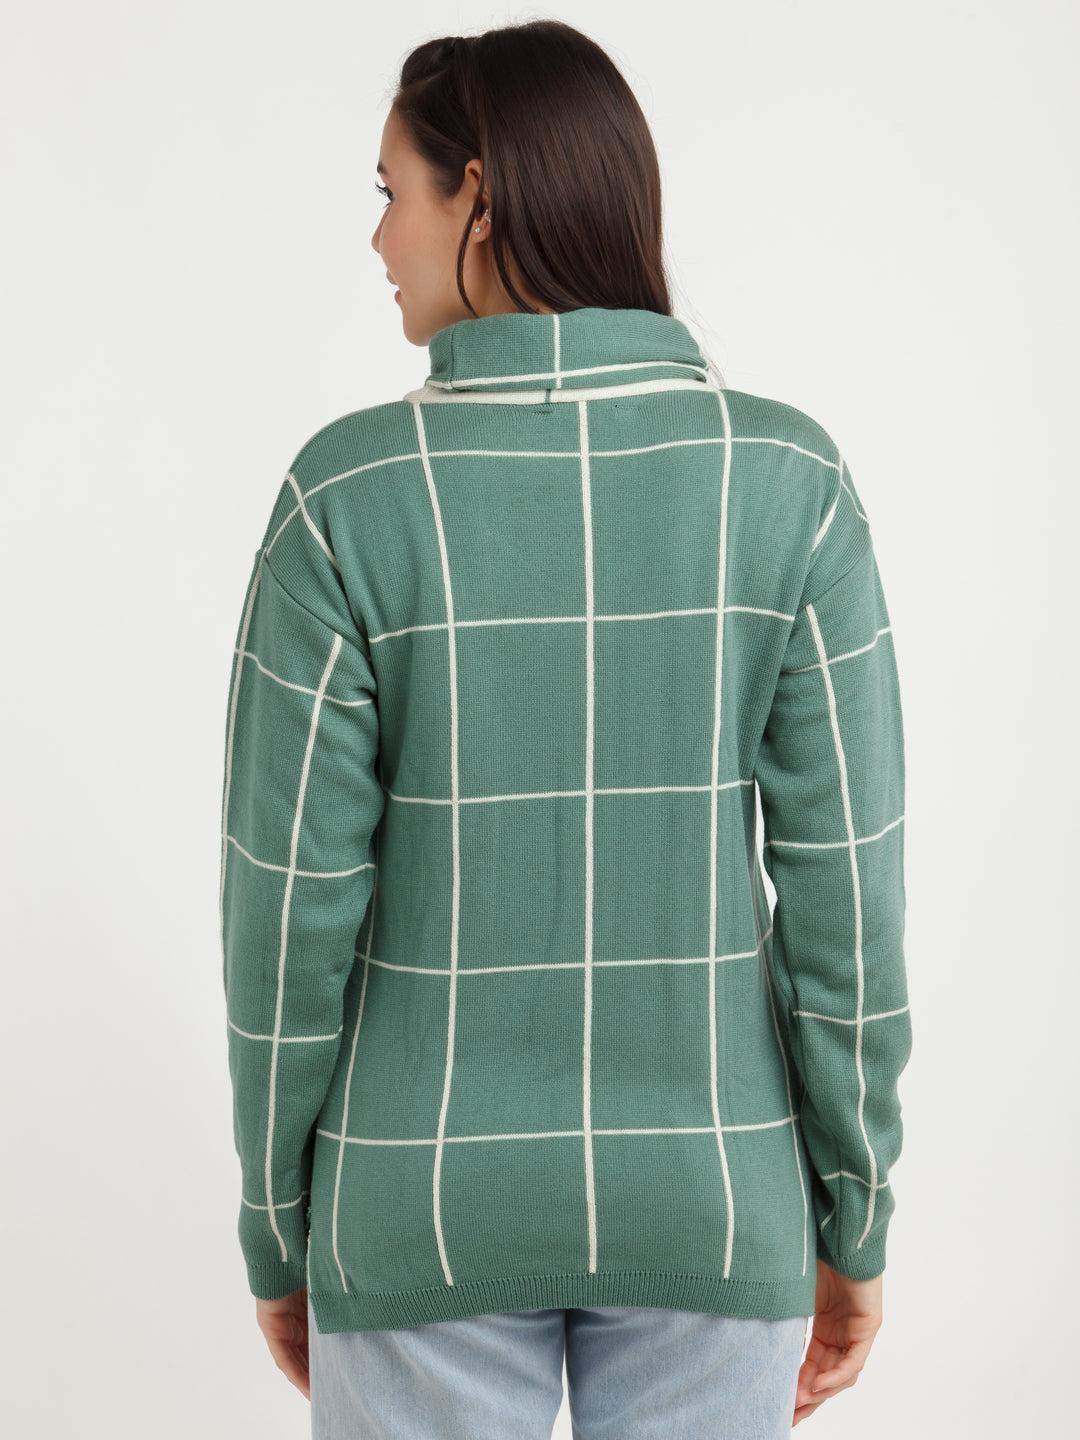 Off White Checked Sweater For Women